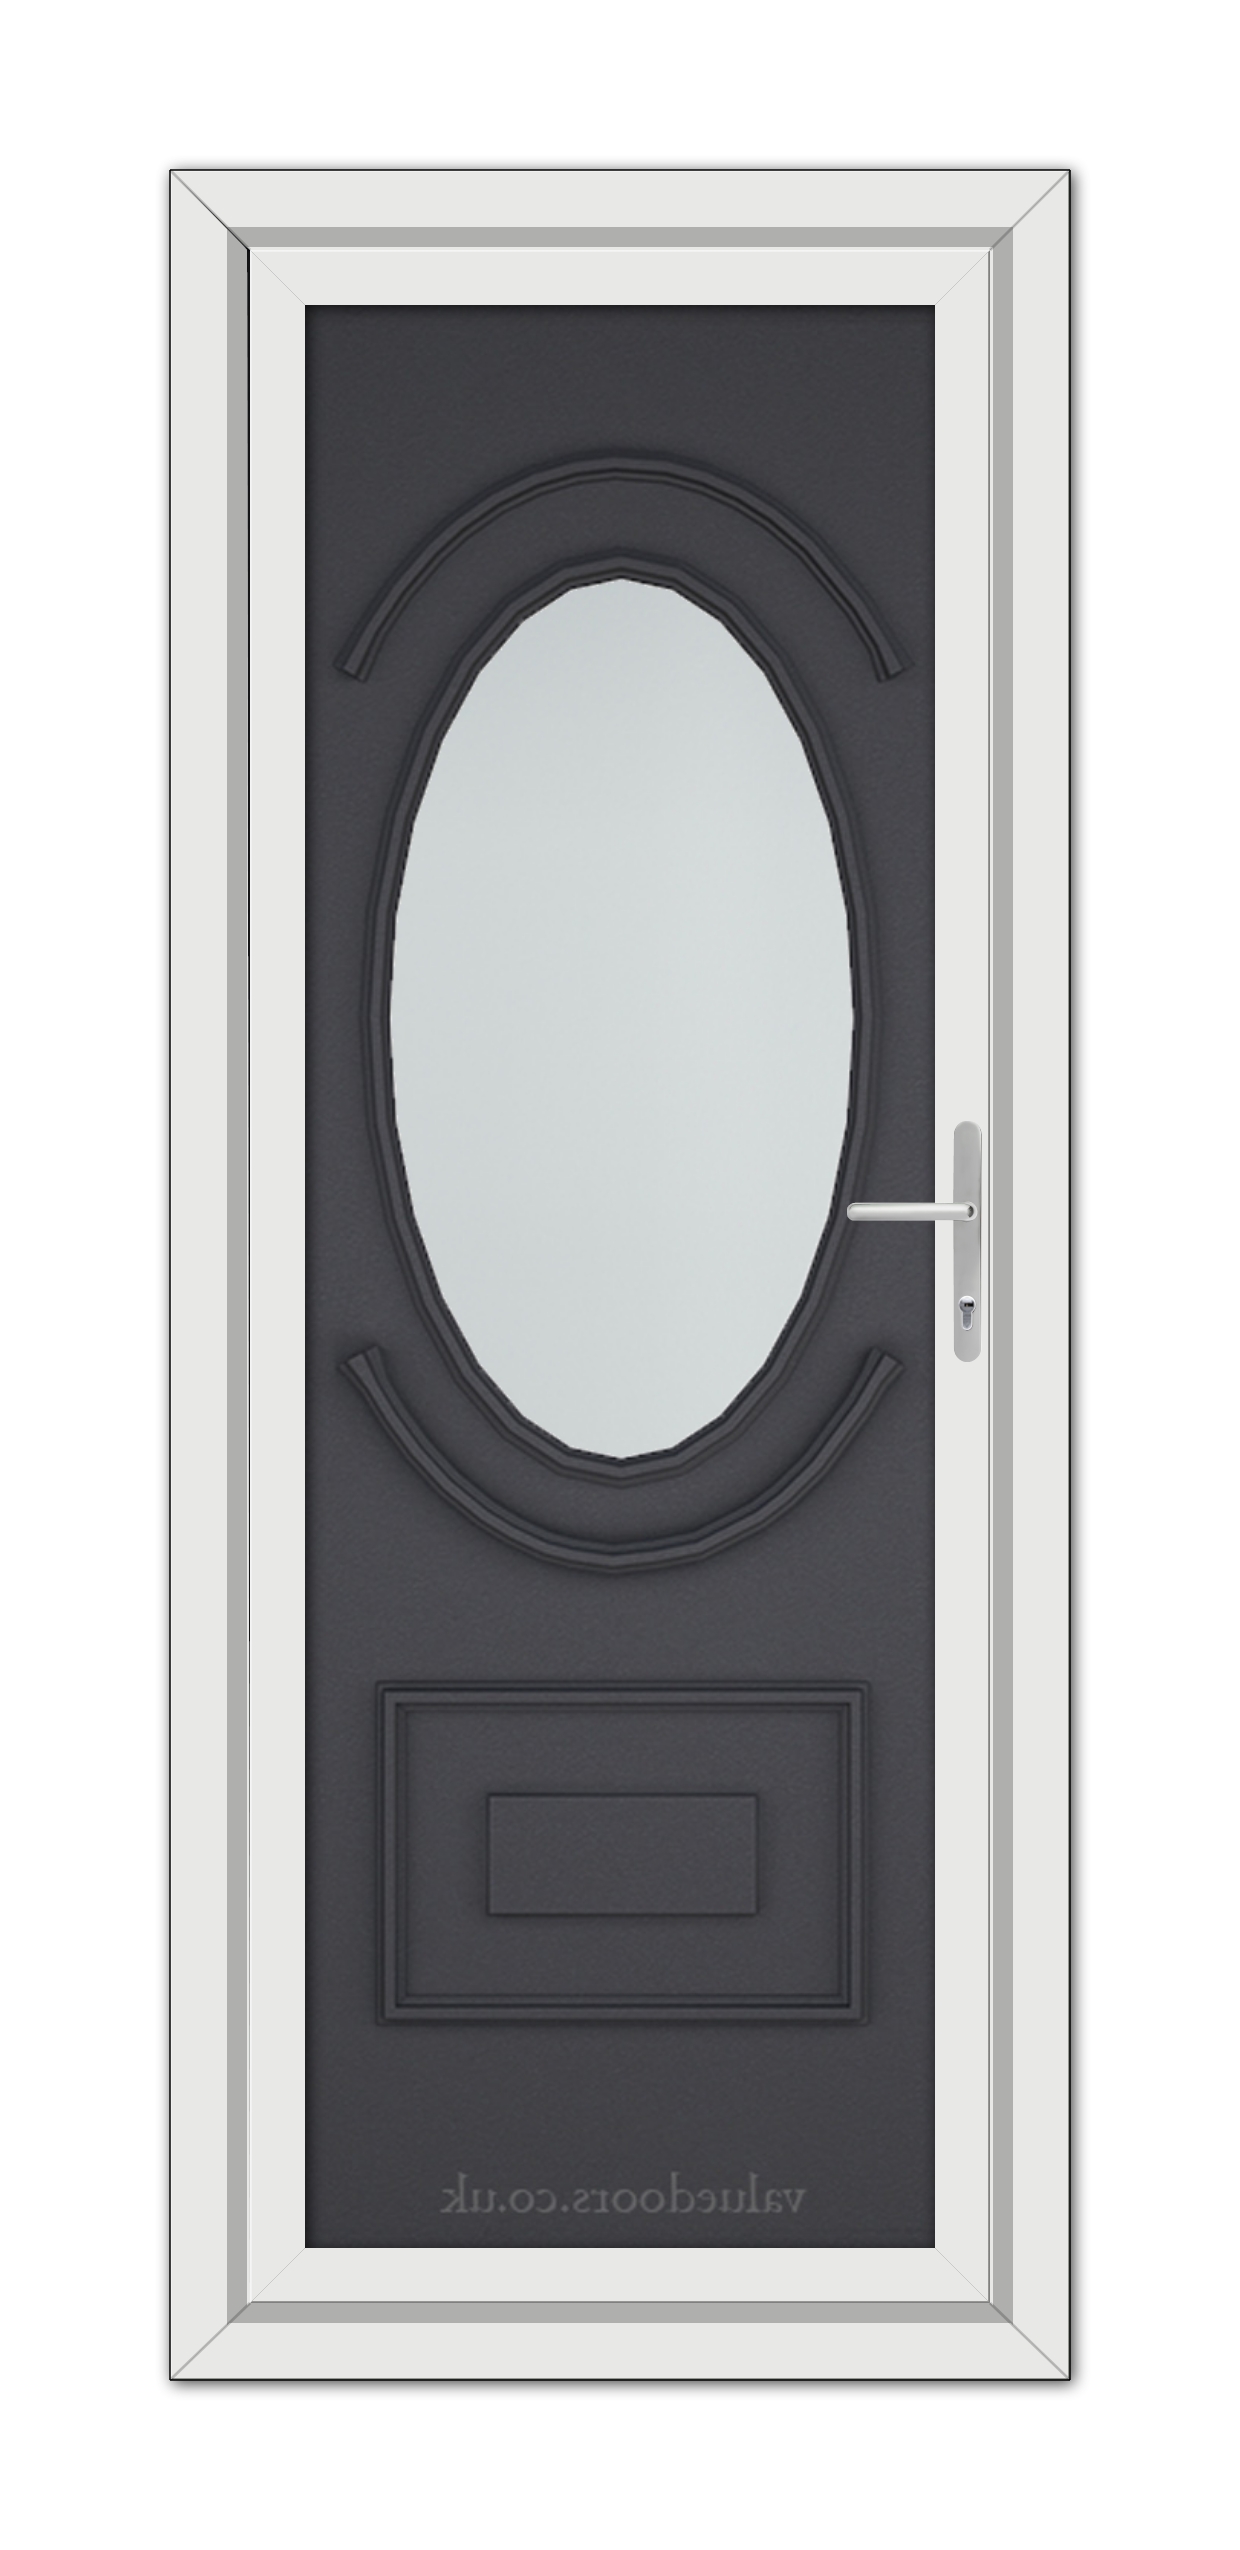 A modern Grey Grained Richmond uPVC door featuring a large oval glass panel at the top and a rectangular raised panel at the bottom, framed in white, with a silver handle on the right.